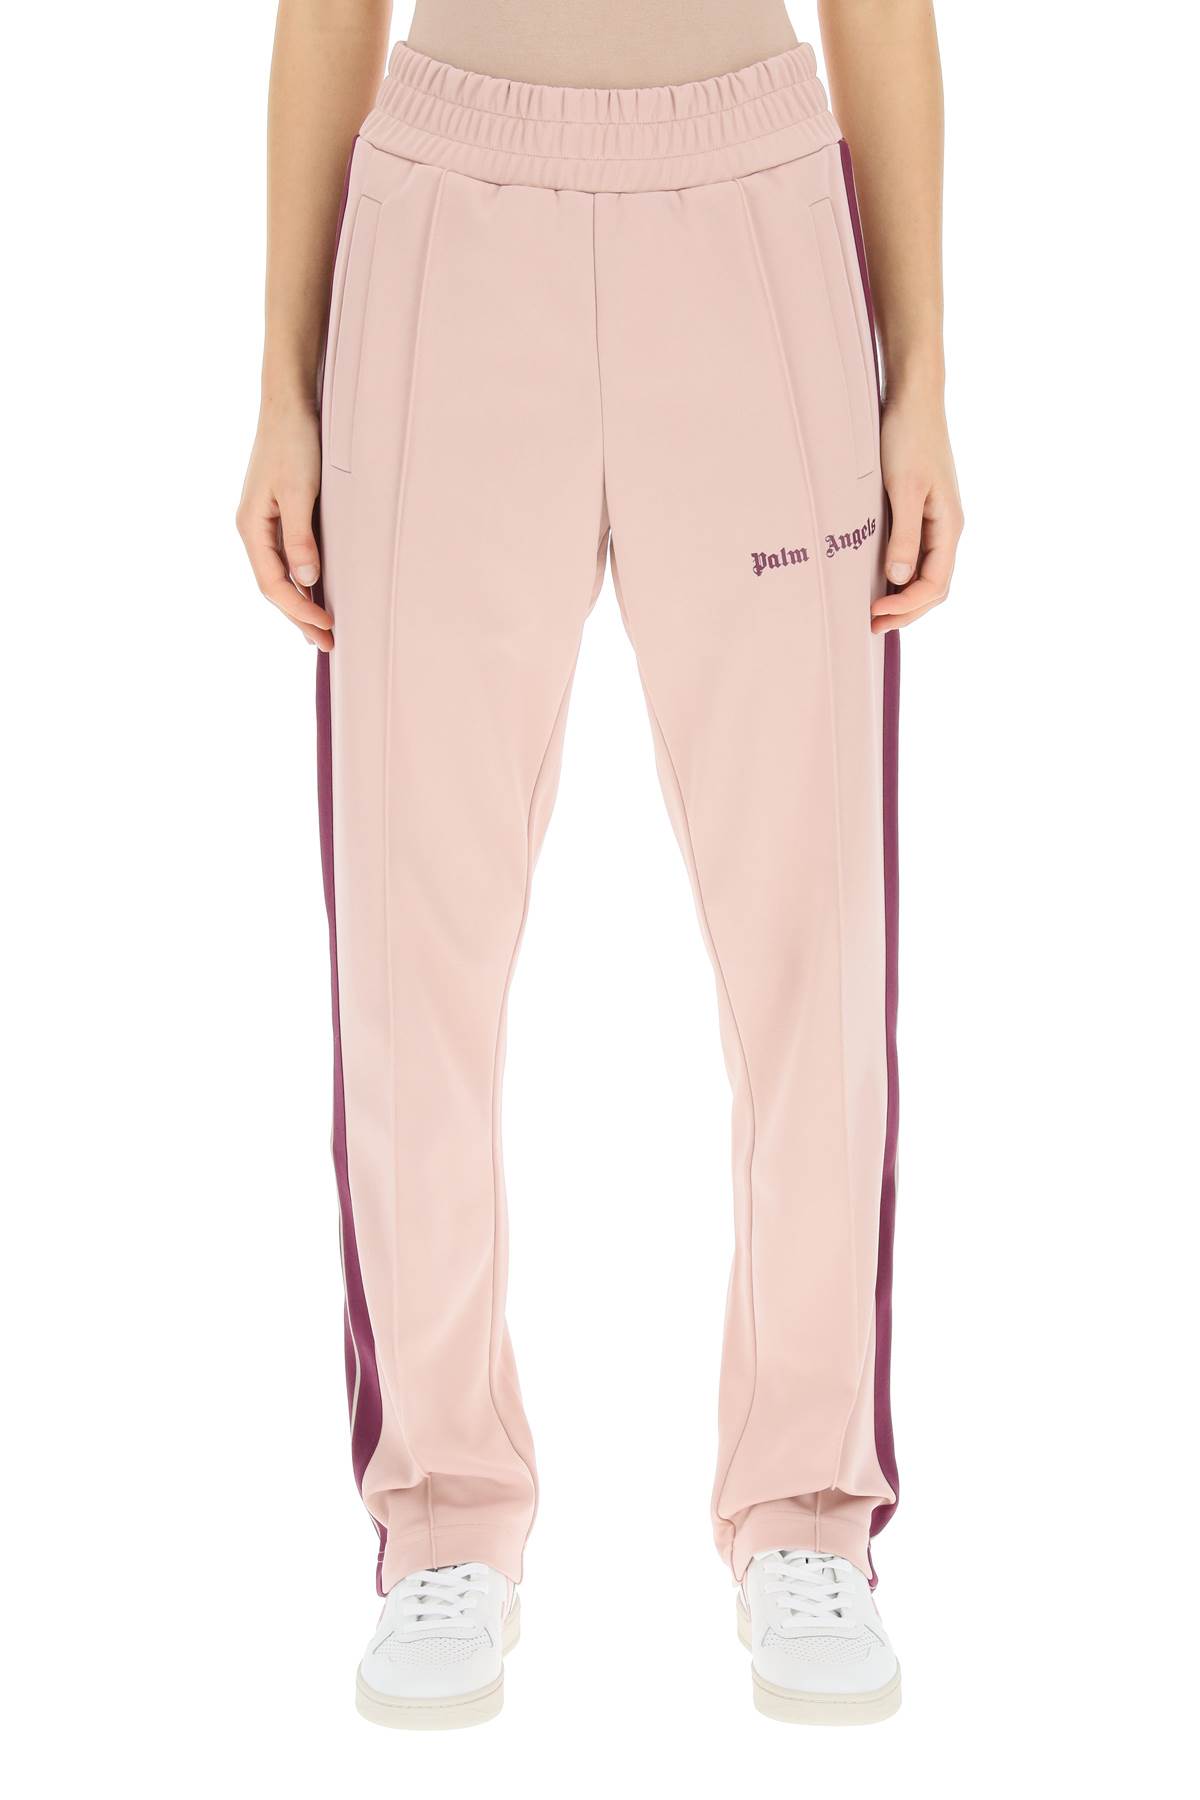 Palm Angels Trackpants With Side Bands